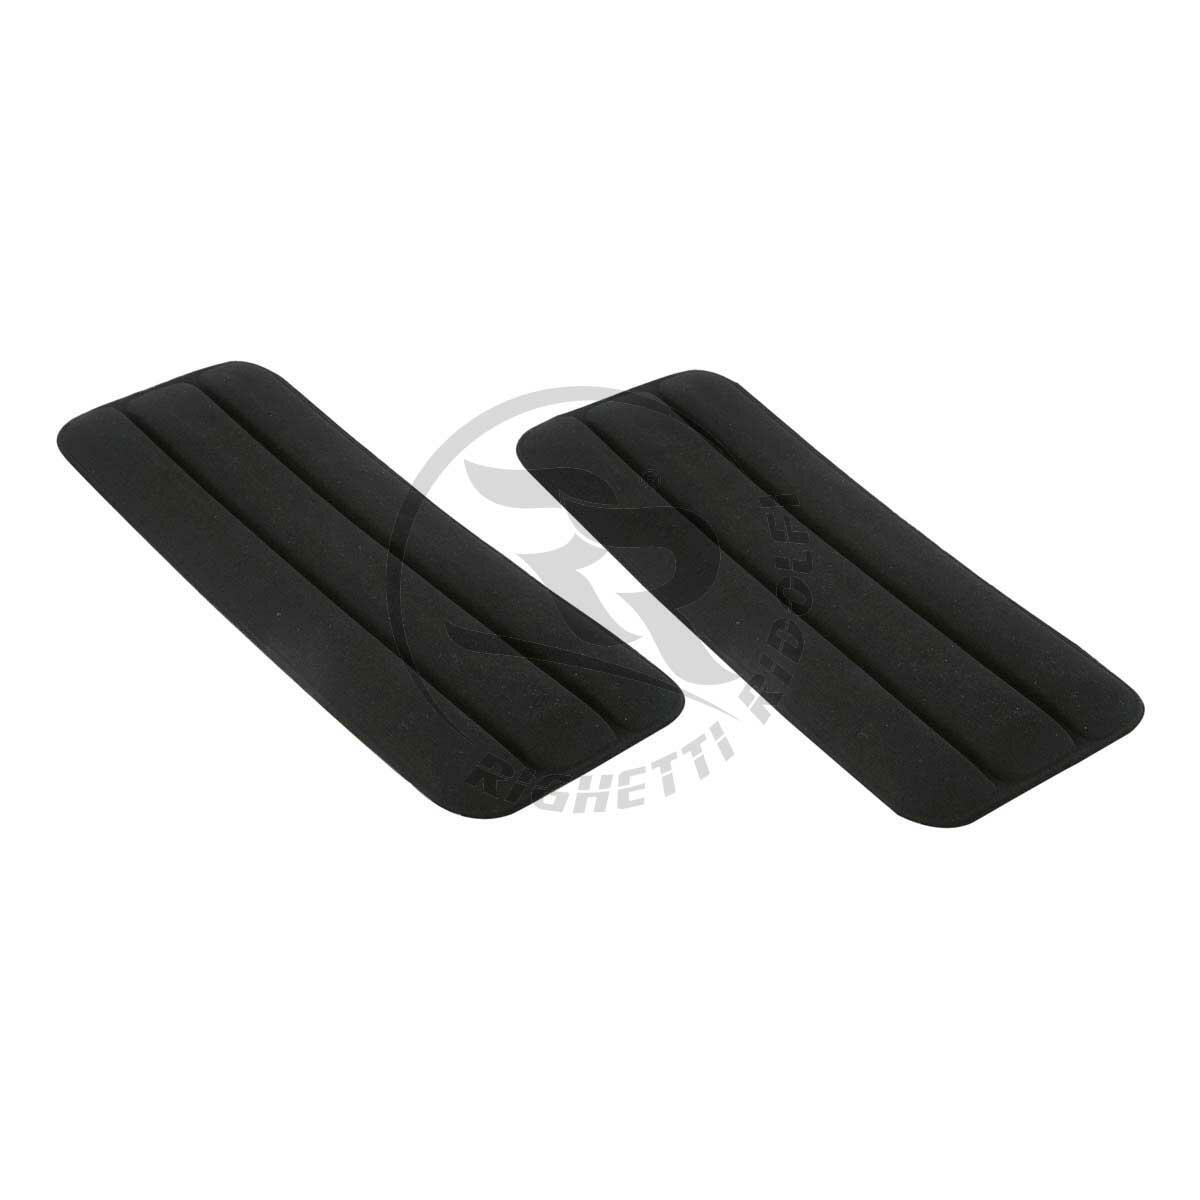 Two Piece Seat Pad - Rear or Side